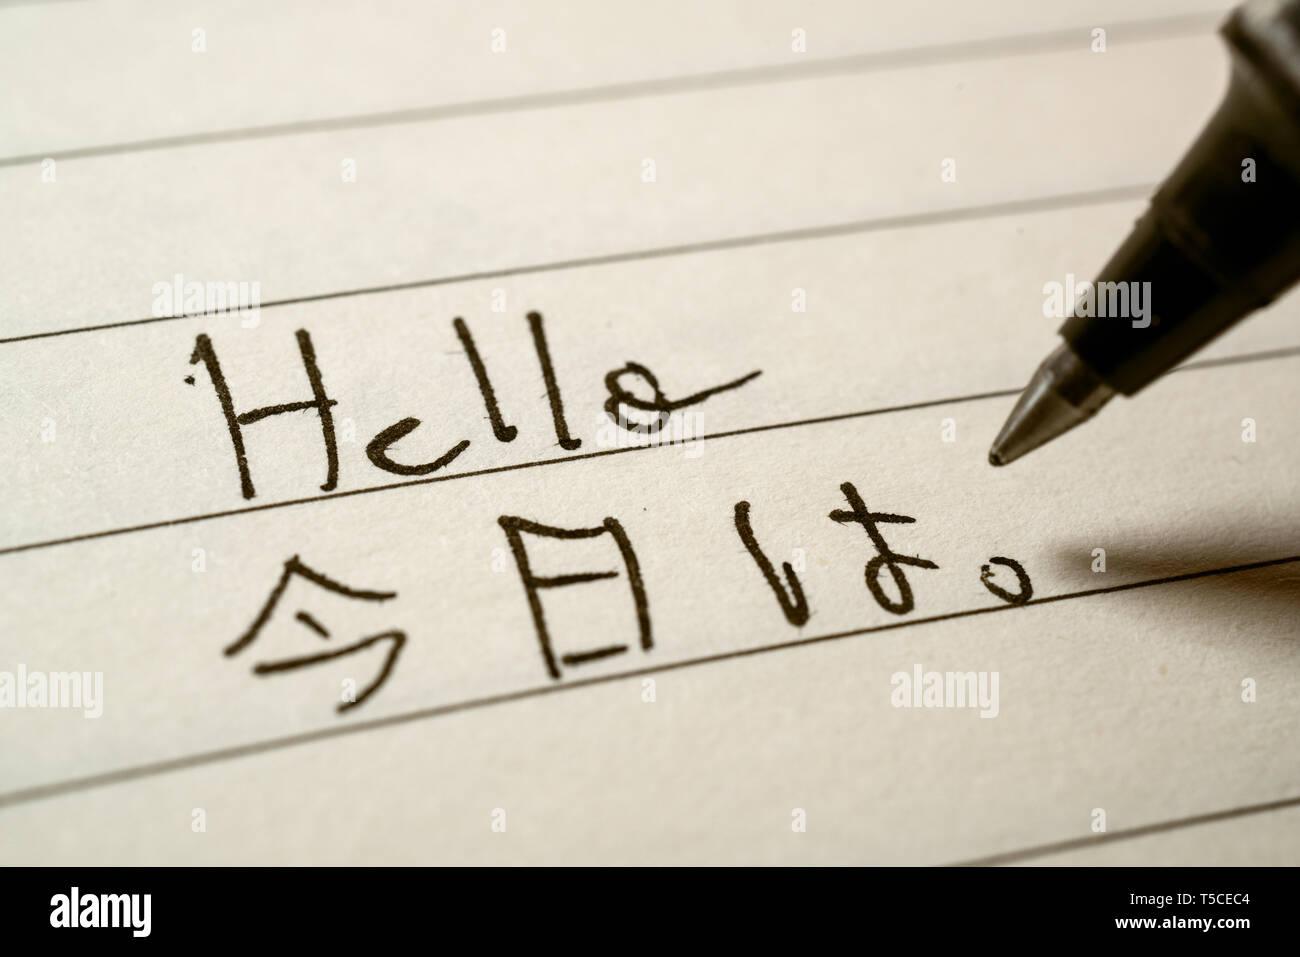 Beginner Japanese language learner writing Hello word in Japanese kanji characters on a notebook close-up shot Stock Photo